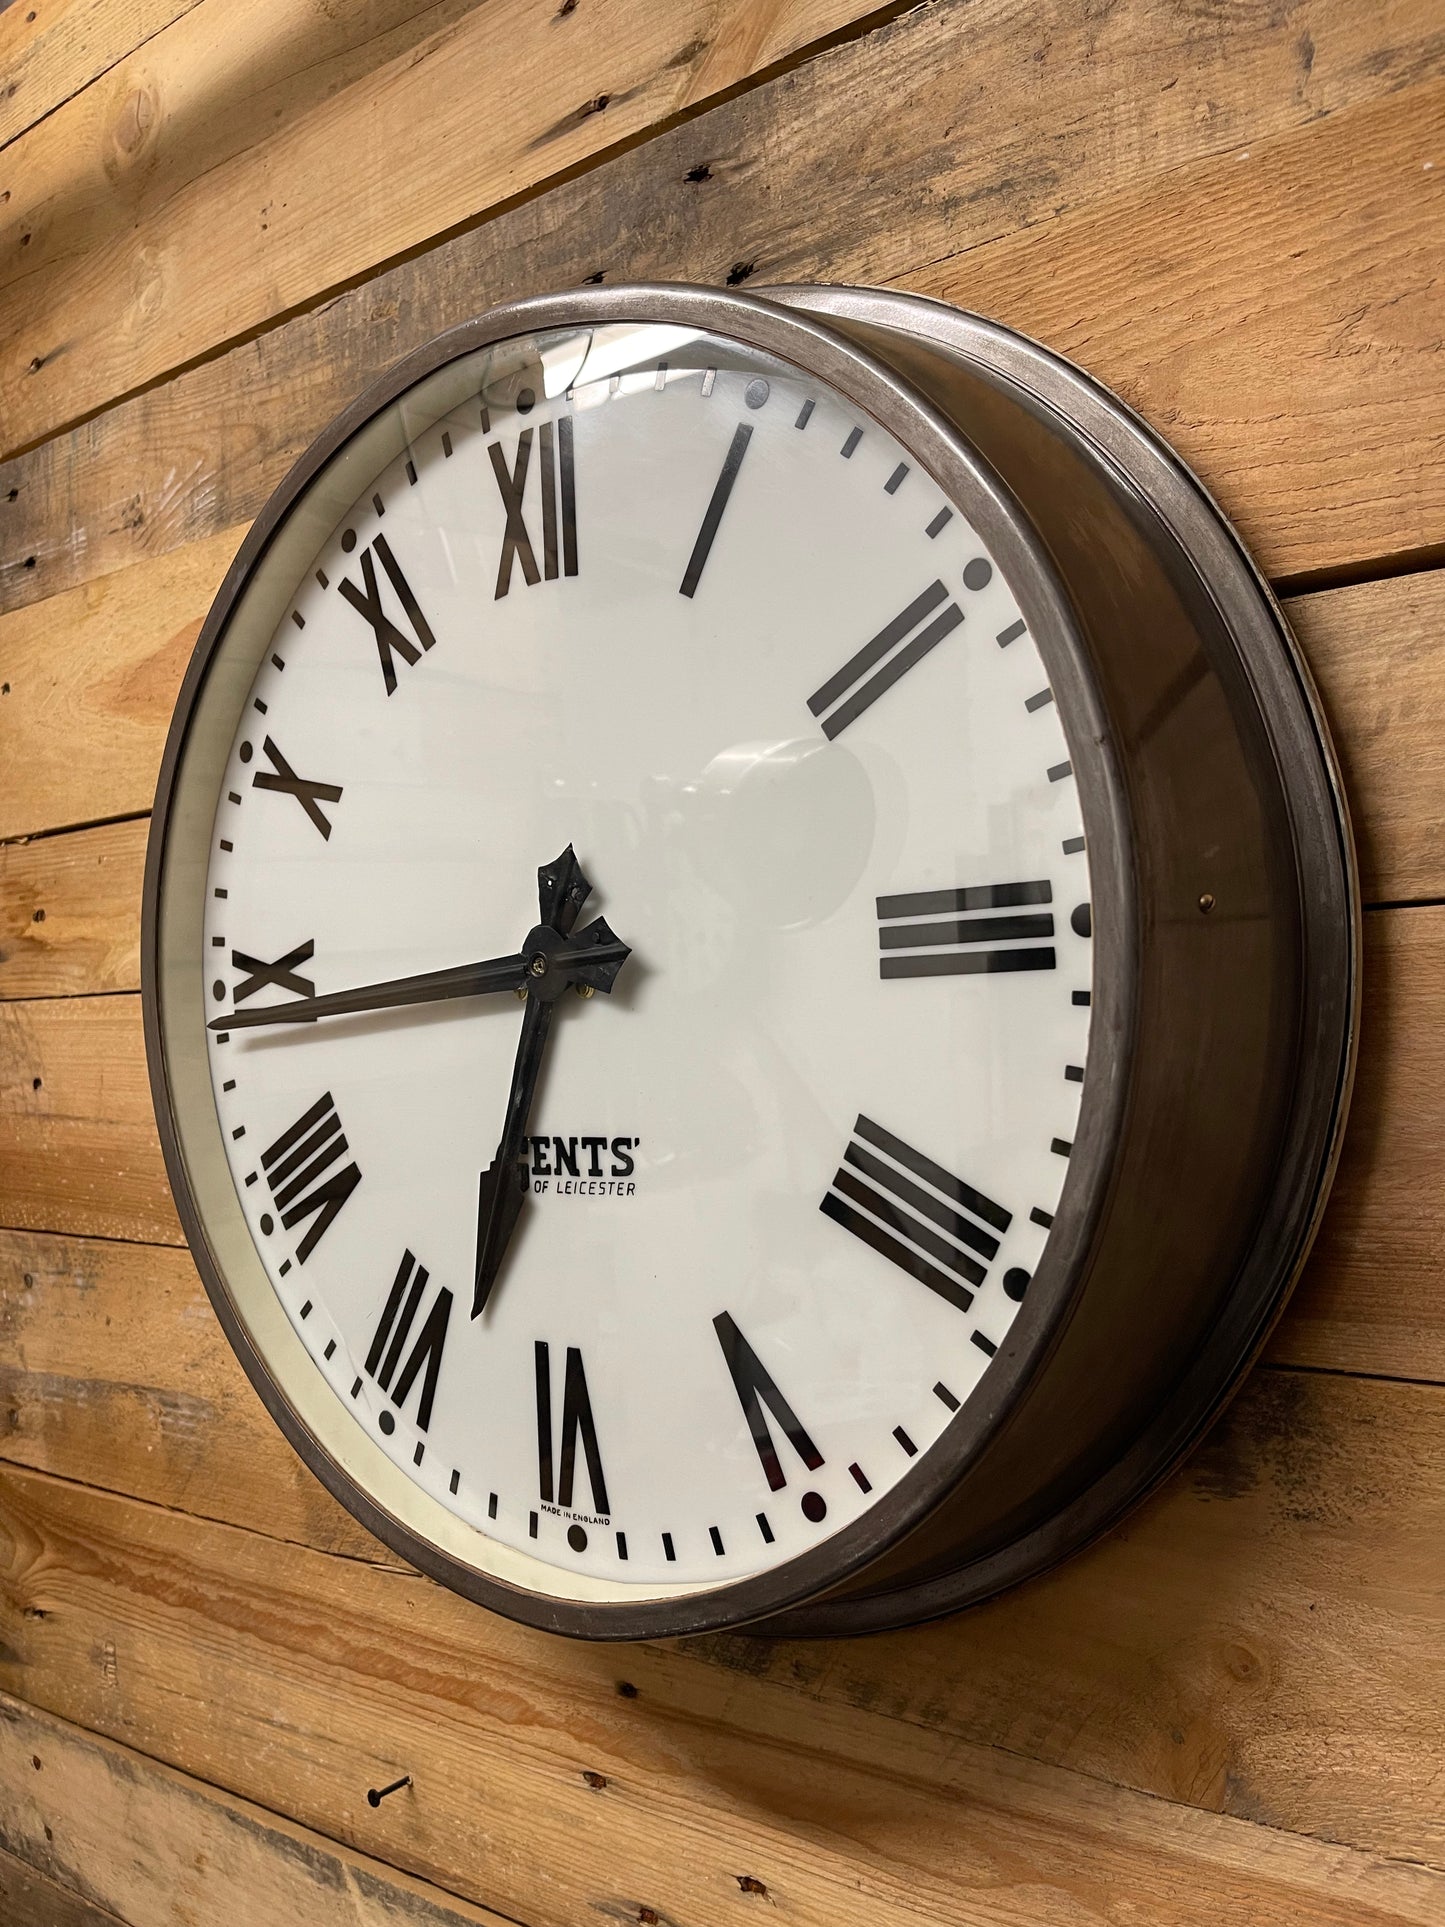 Large Vintage 1940s Industrial Station Clock By Gents Of Leicester